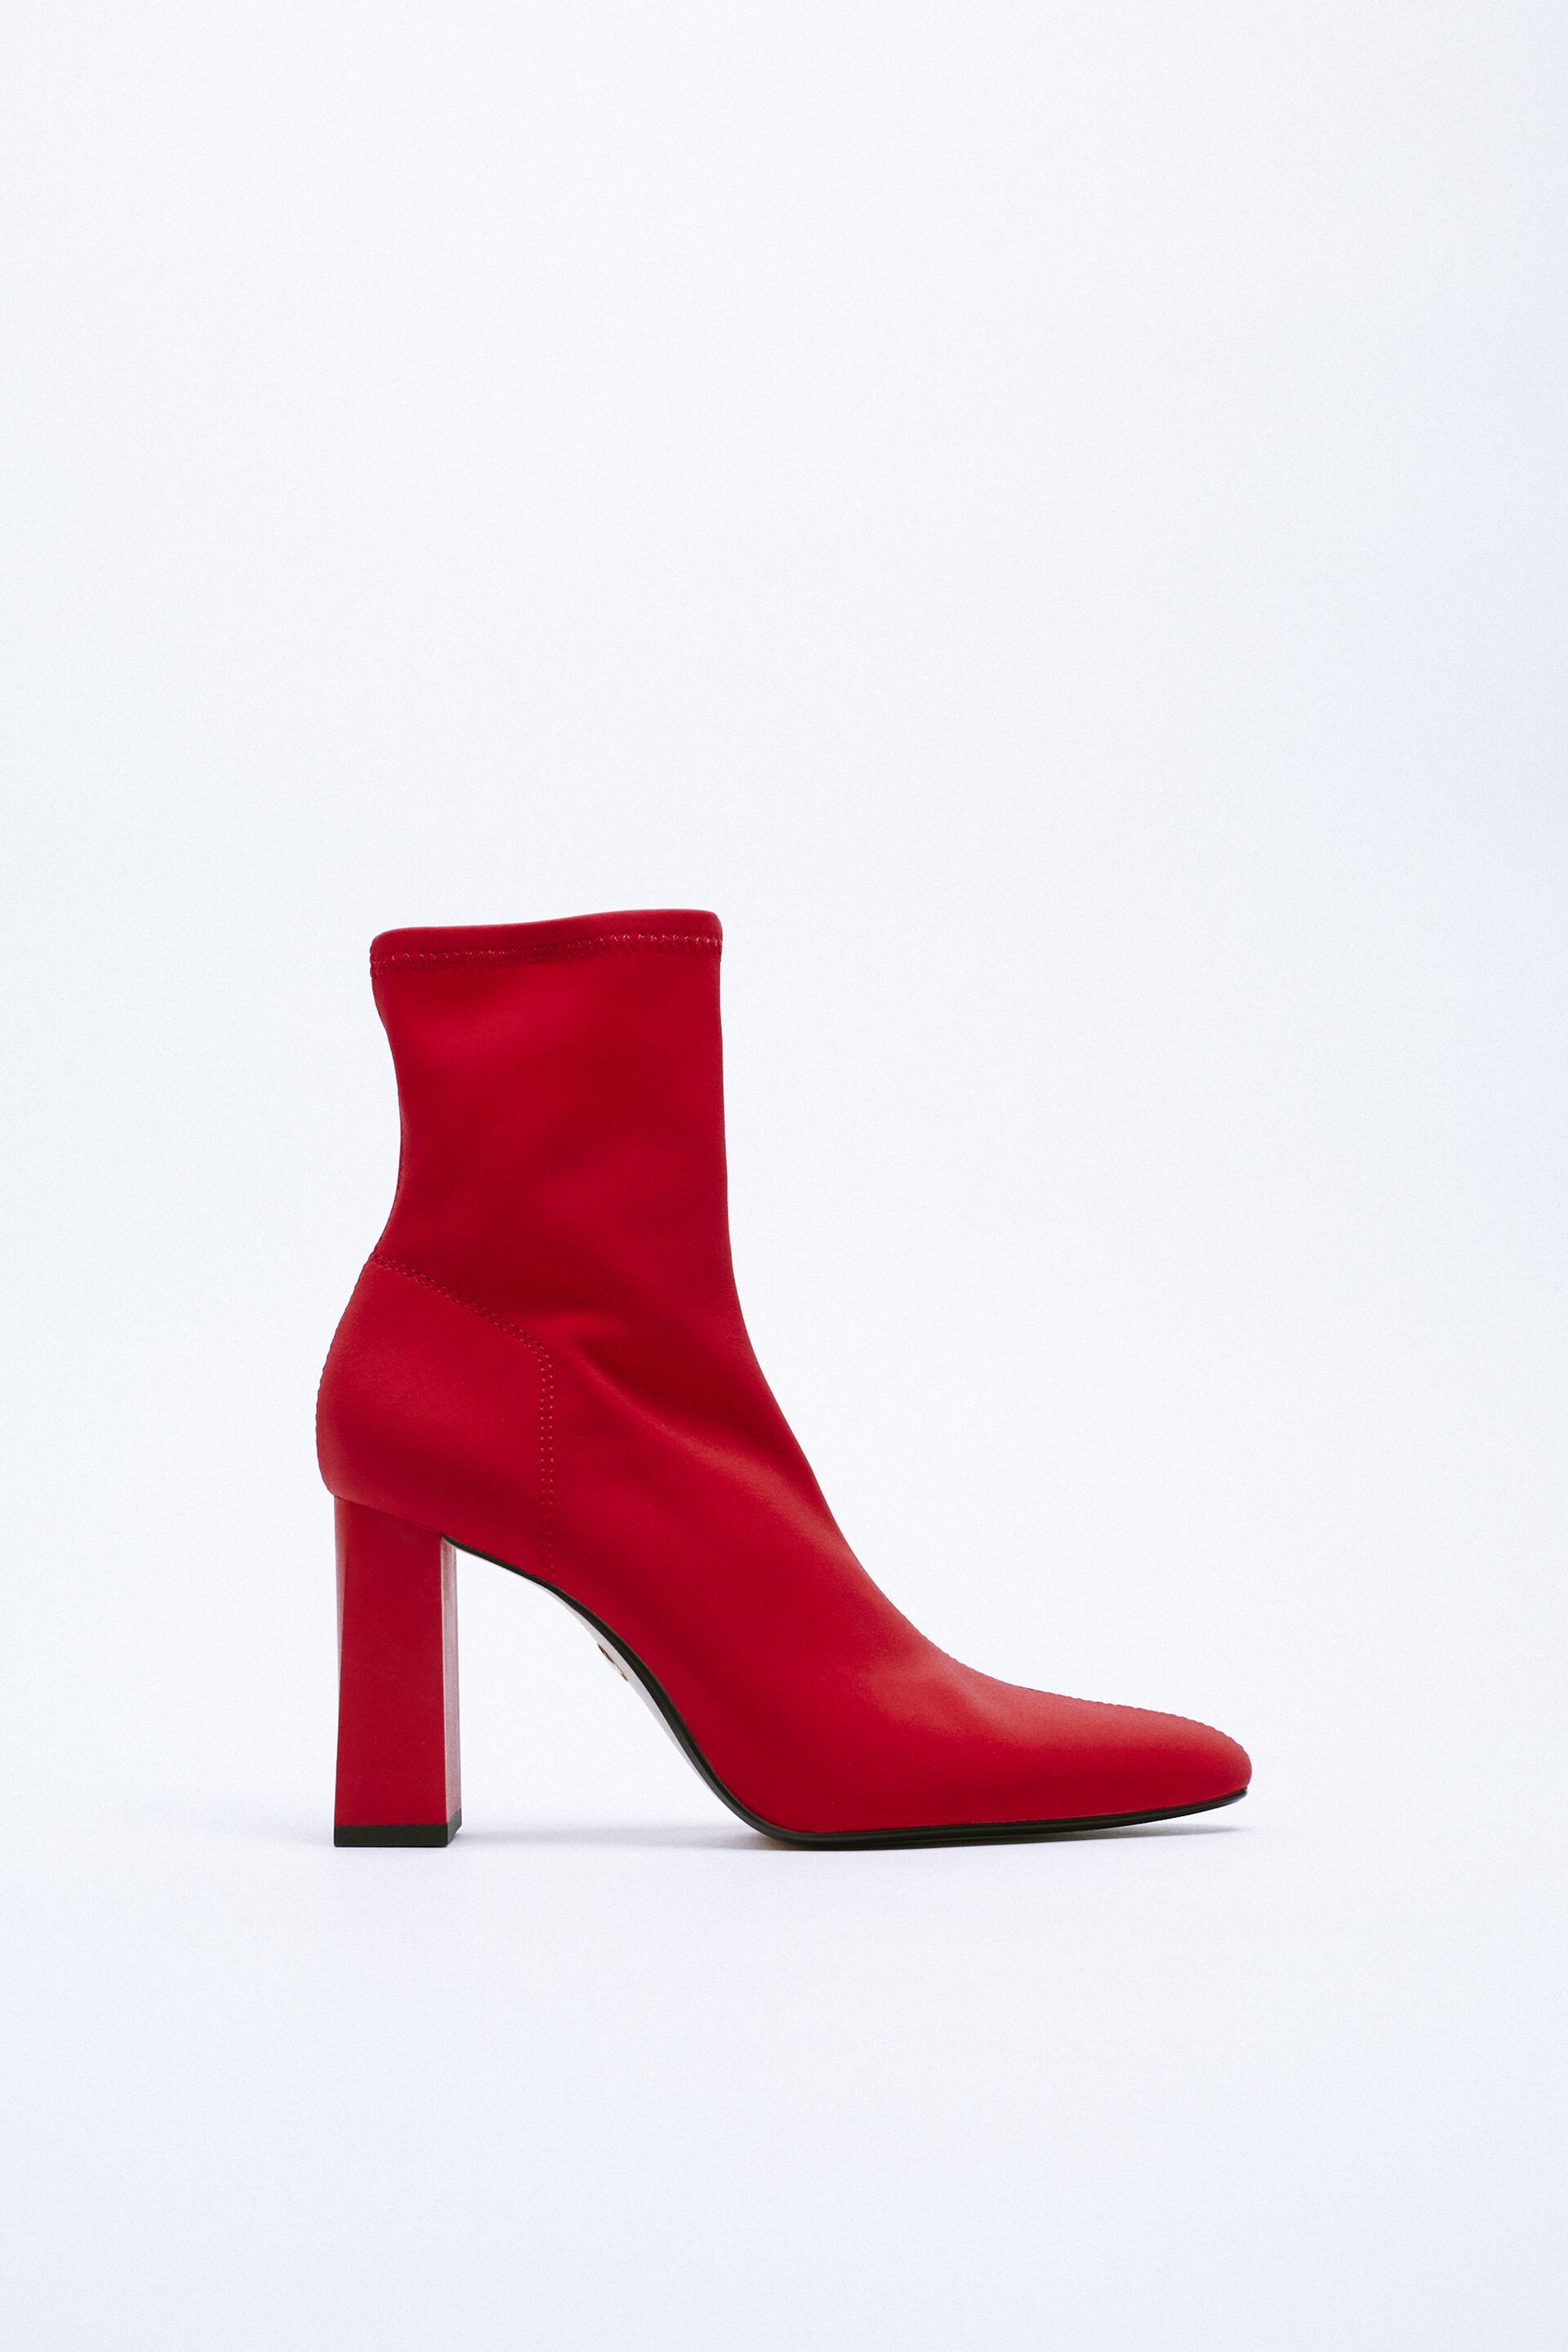 Zara STRETCH FABRIC HEELED ANKLE BOOTS - 137548574-020-